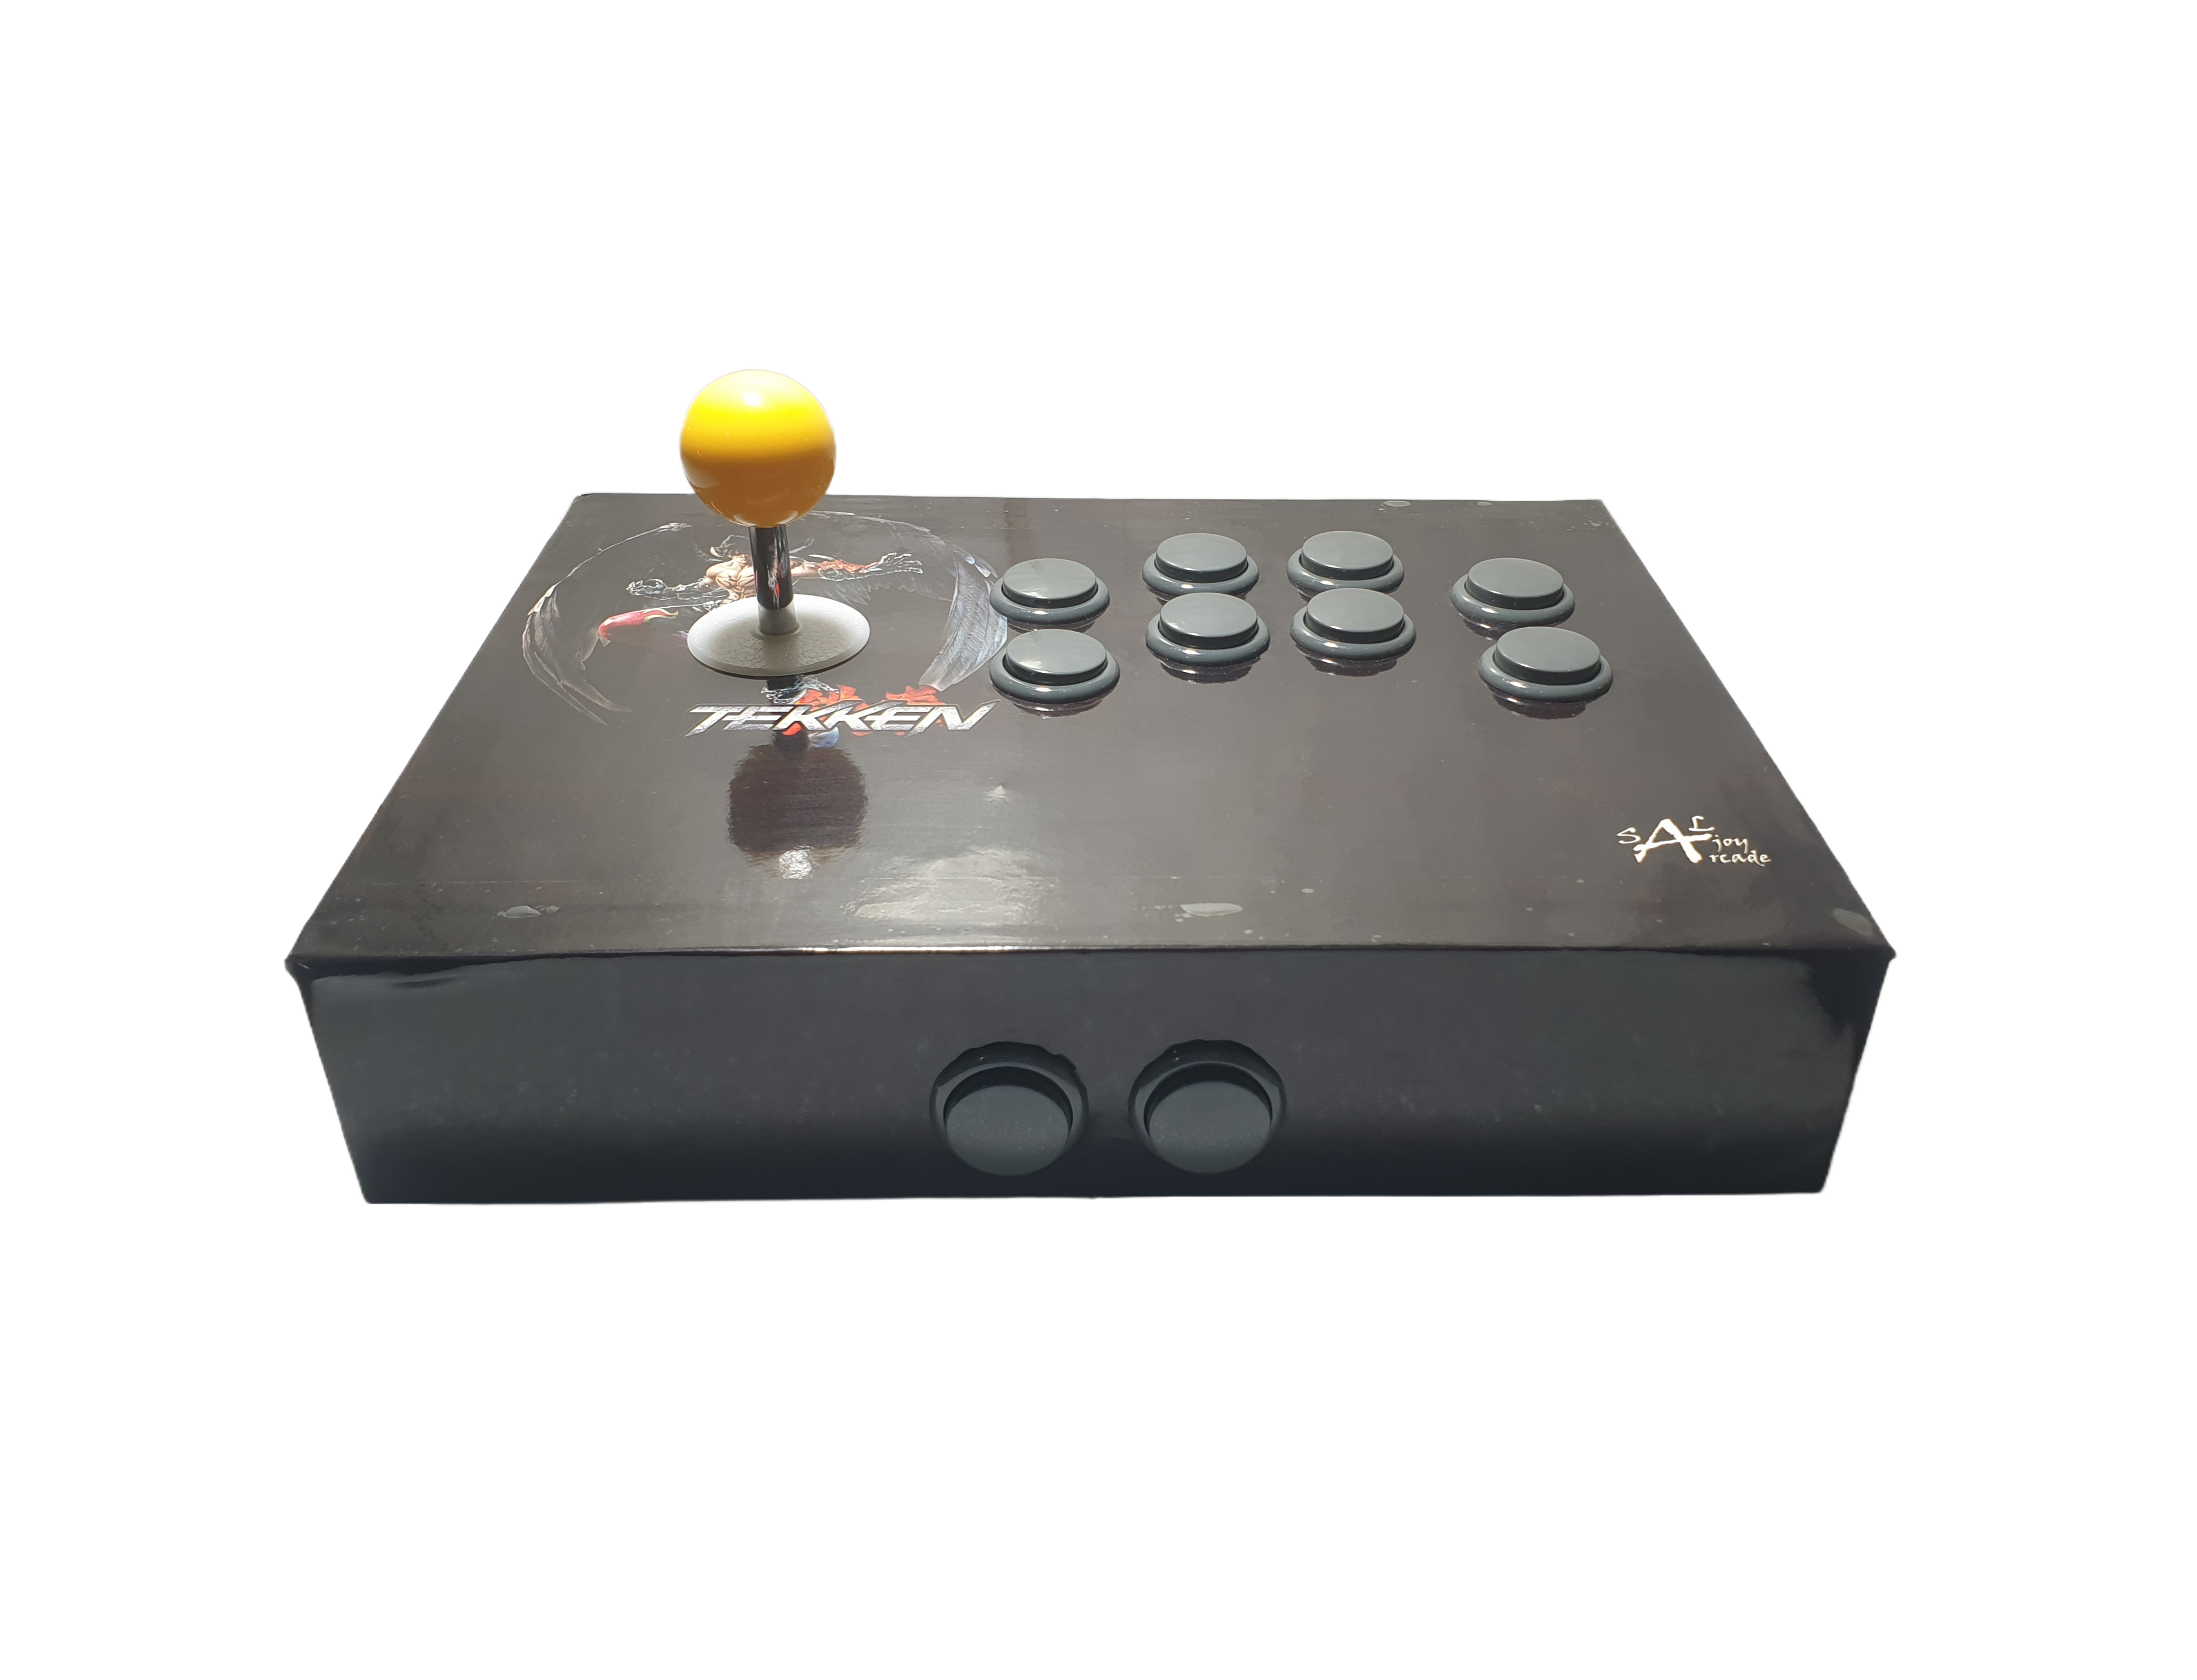 COPY Tekken7 PC USB Arcade Joystick for PS3, Windows and Android Specially Designed for Takken7 PC [Model: YST7]